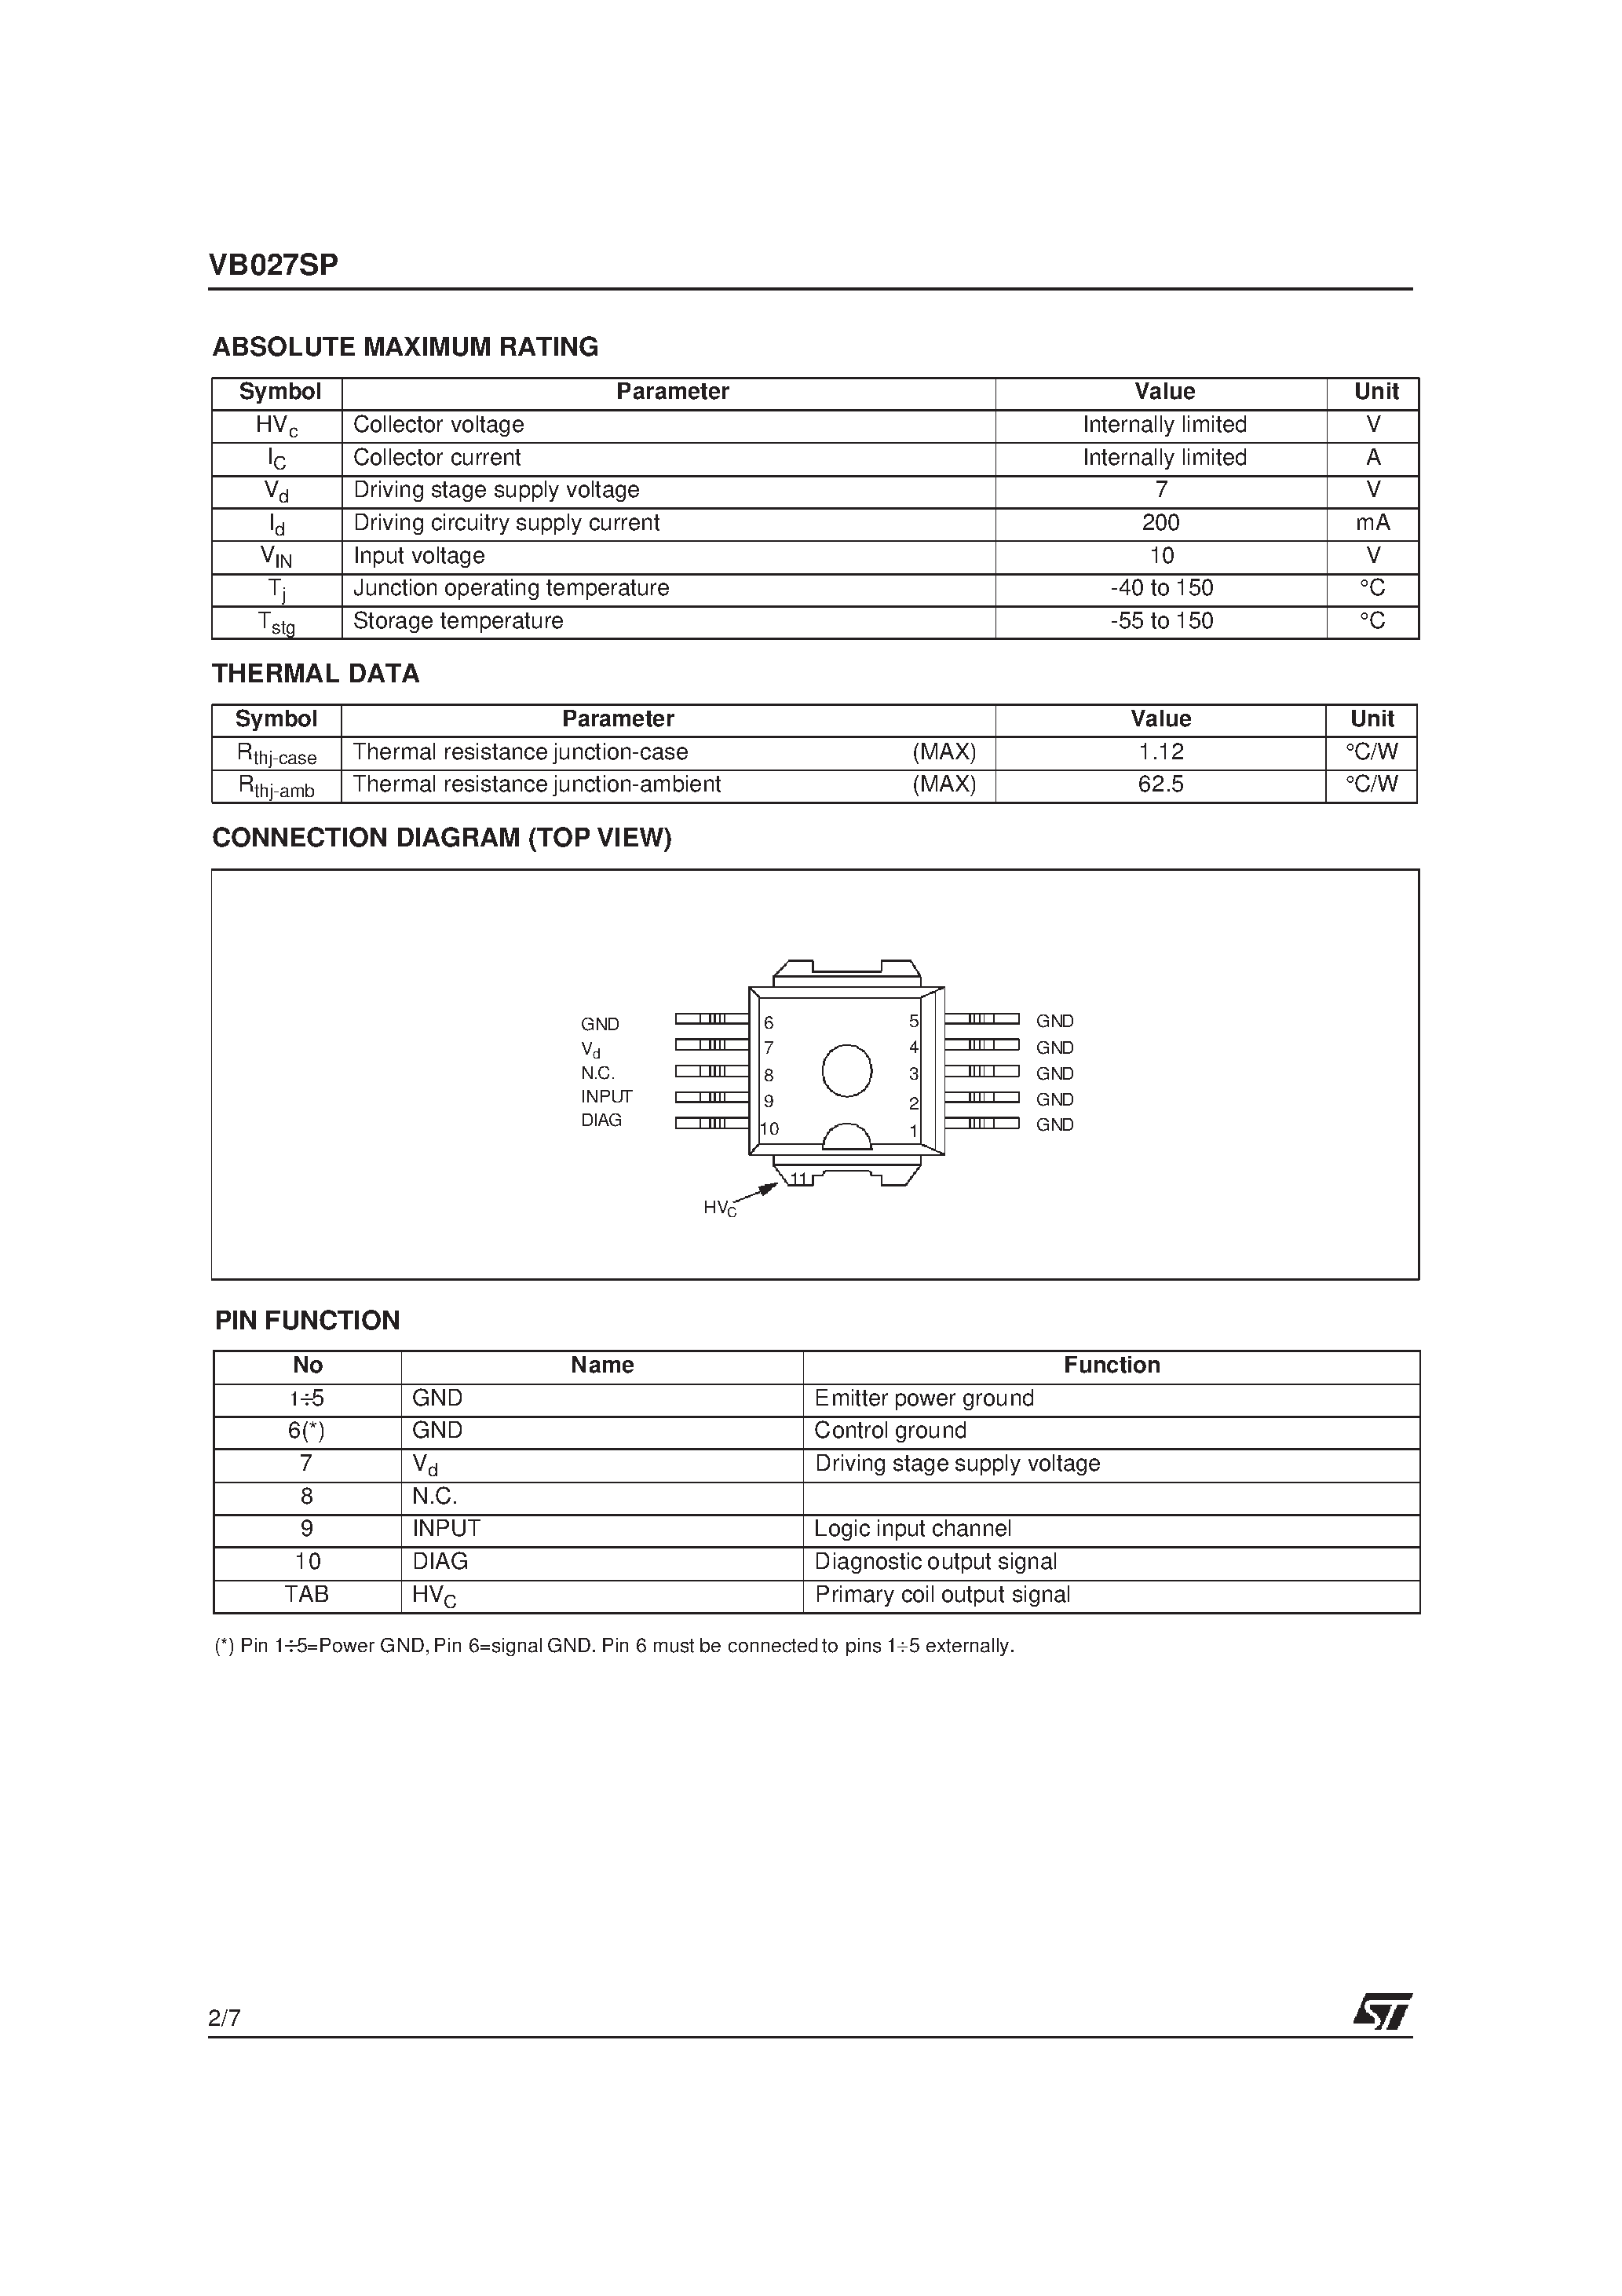 Datasheet VB027SP - HIGH VOLTAGE IGNITION COIL DRIVER POWER I.C. page 2